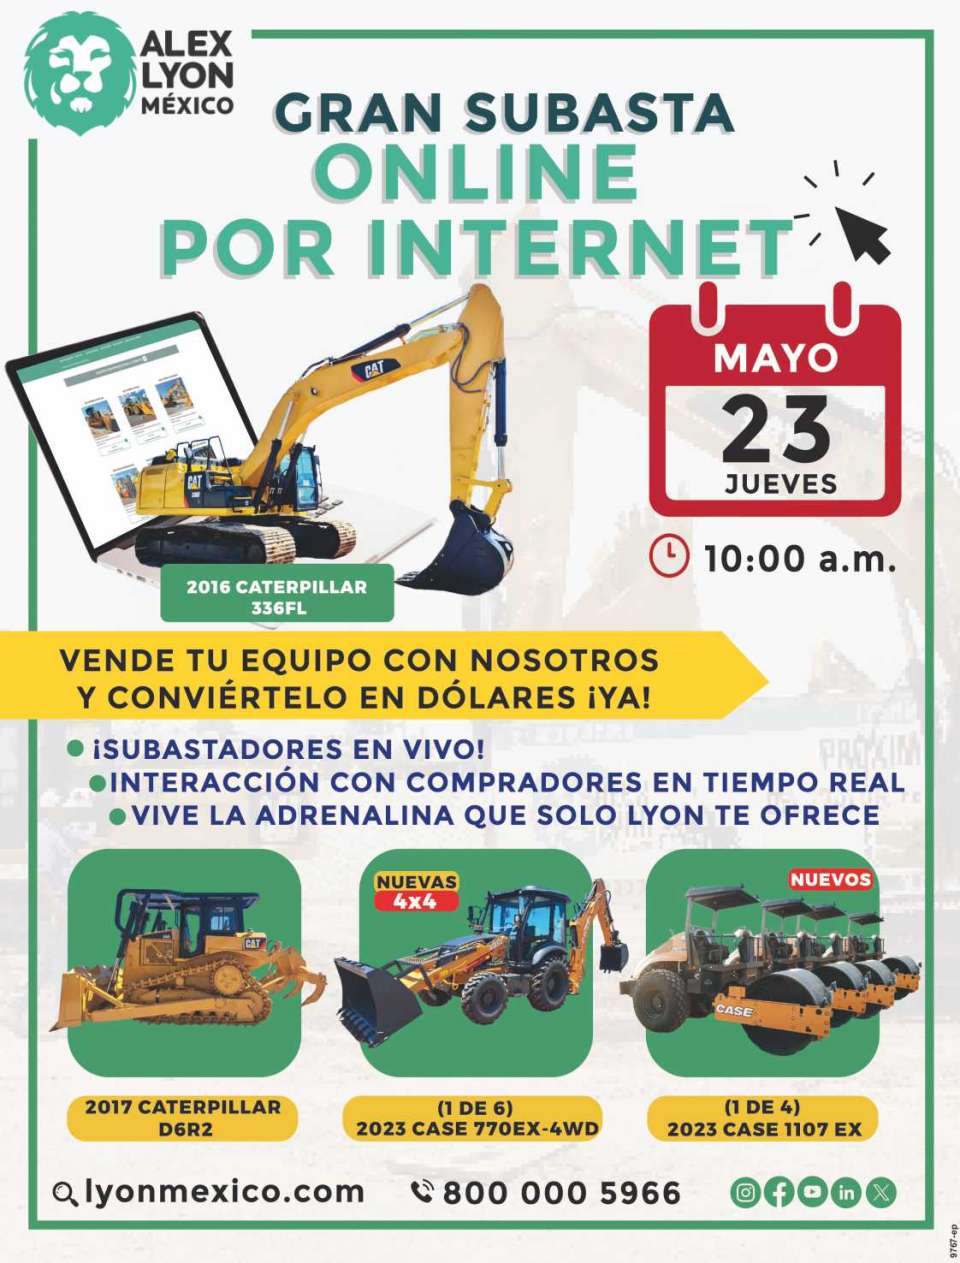 Alex Lyon, the fastest growing construction machinery auctioneer in Mexico. If you can not attend, you can buy at LYON bid on line and Proxibid Live Offers. www.lyonmexico.com